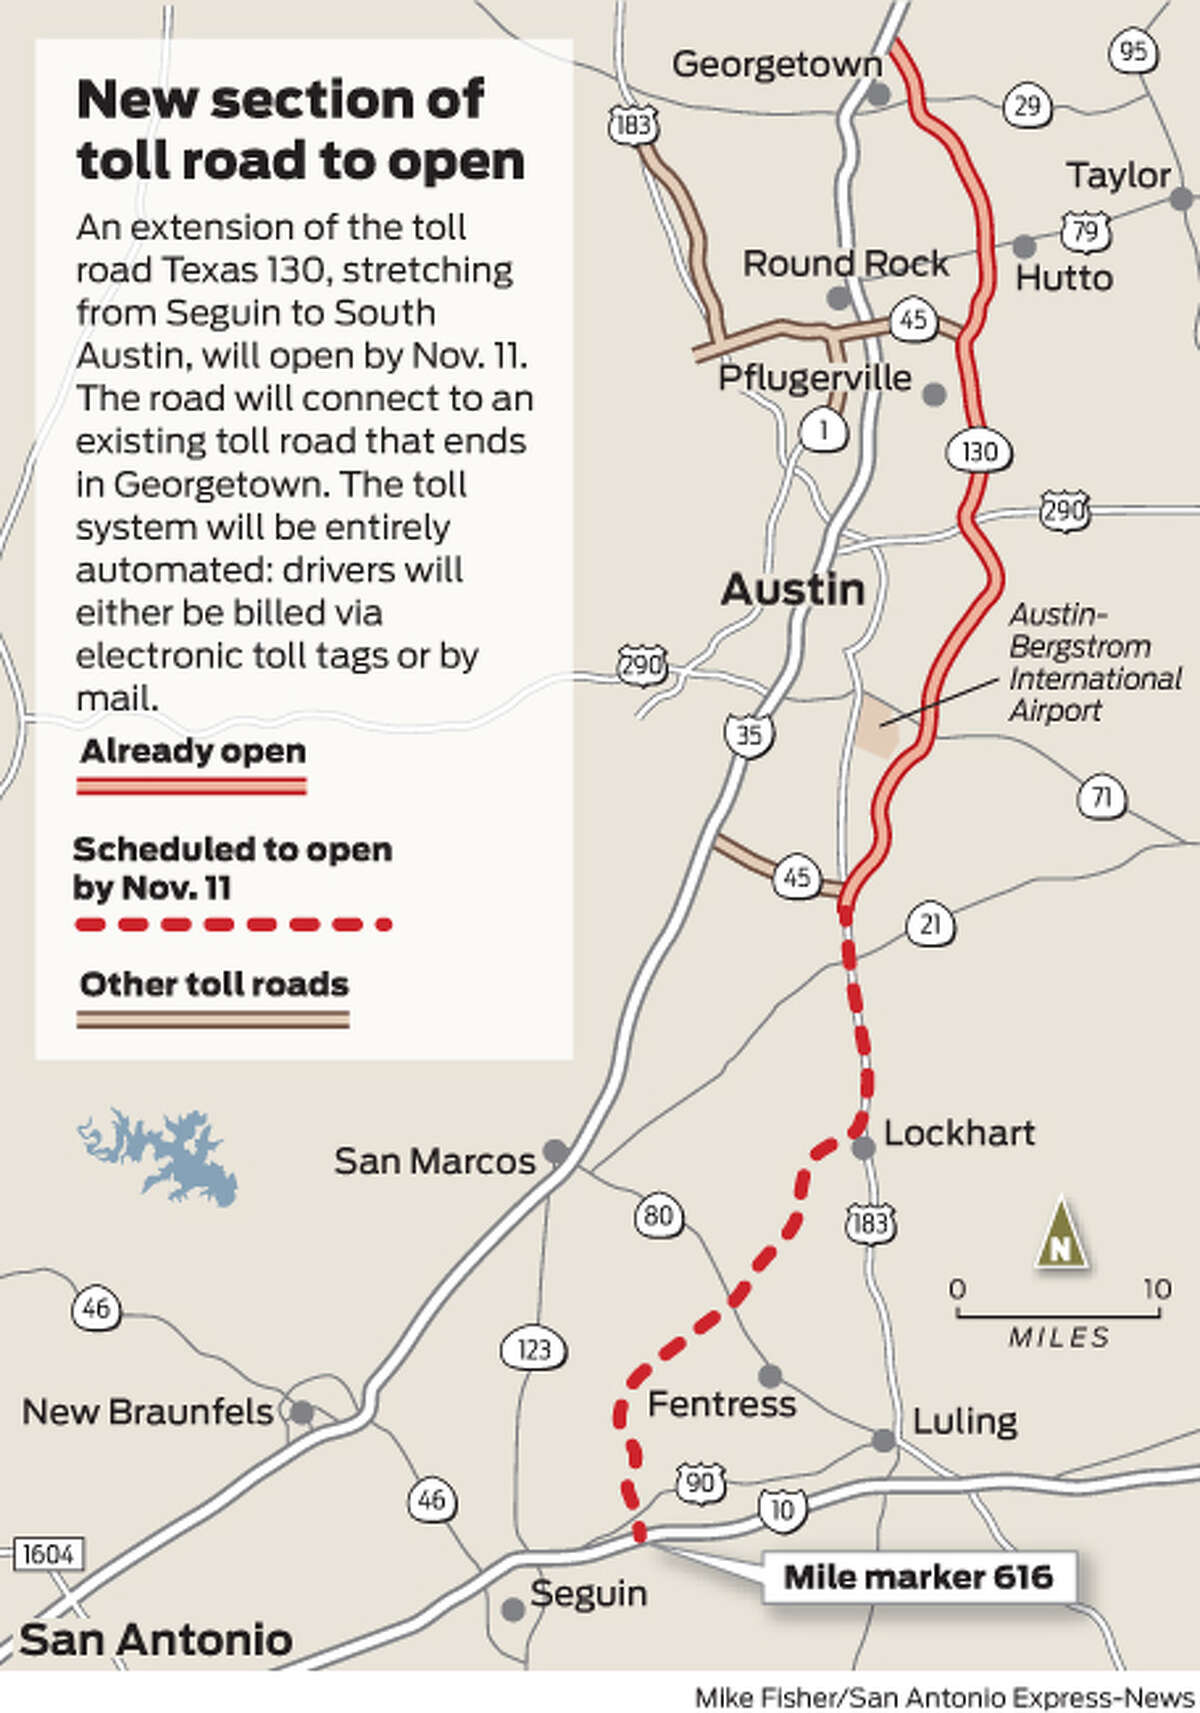 An extension of the toll road Texas 130, stretching from Seguin to South Austin, will open by Nov. 11. The road will connect to an existing toll road that ends in Georgetown. The toll system will be entirely automated: drivers will either be billed via electronic toll tags or by mail. 